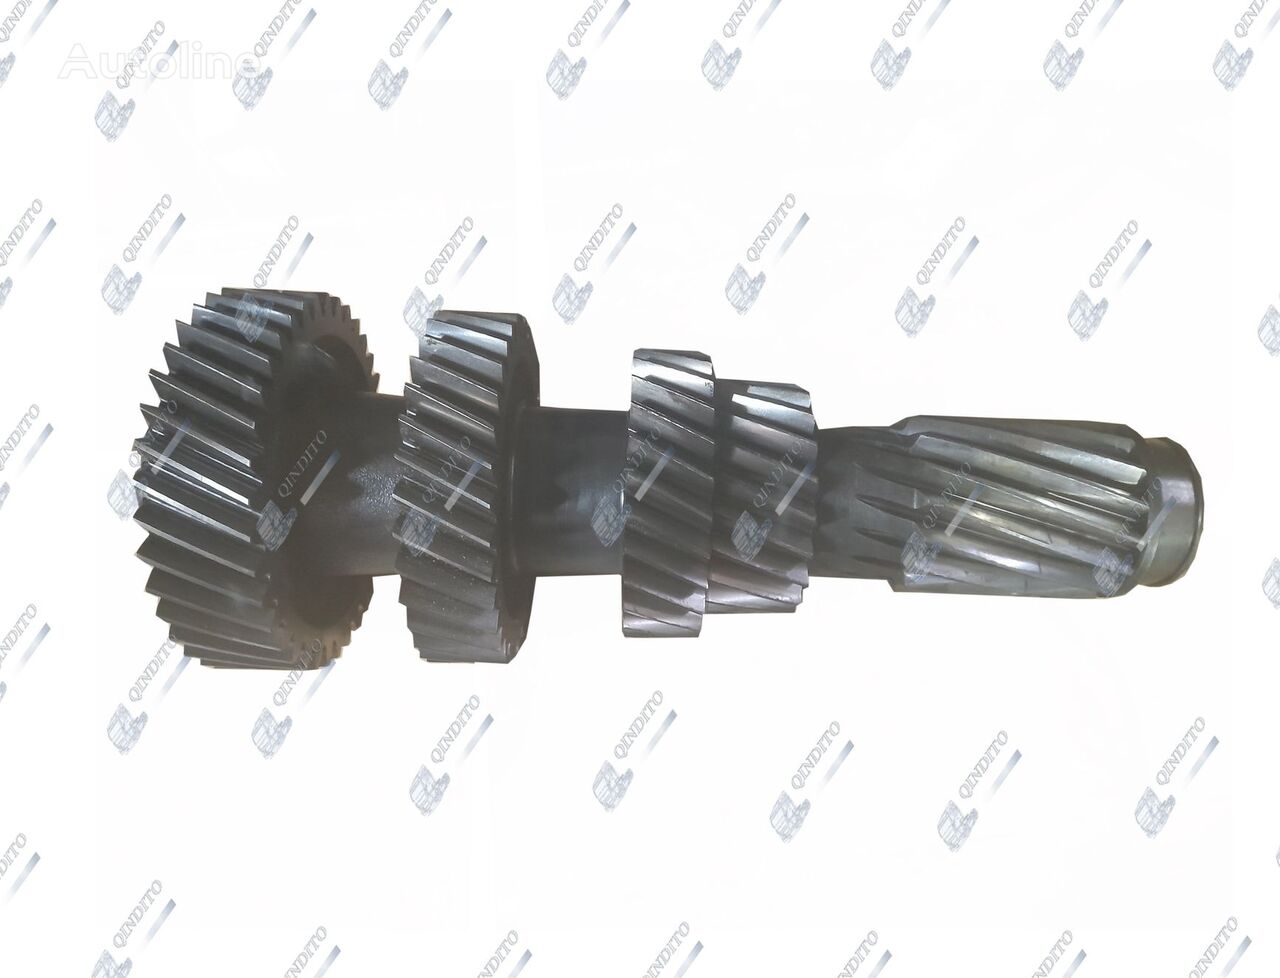 Mercedes-Benz G211-16 countershaft for truck tractor